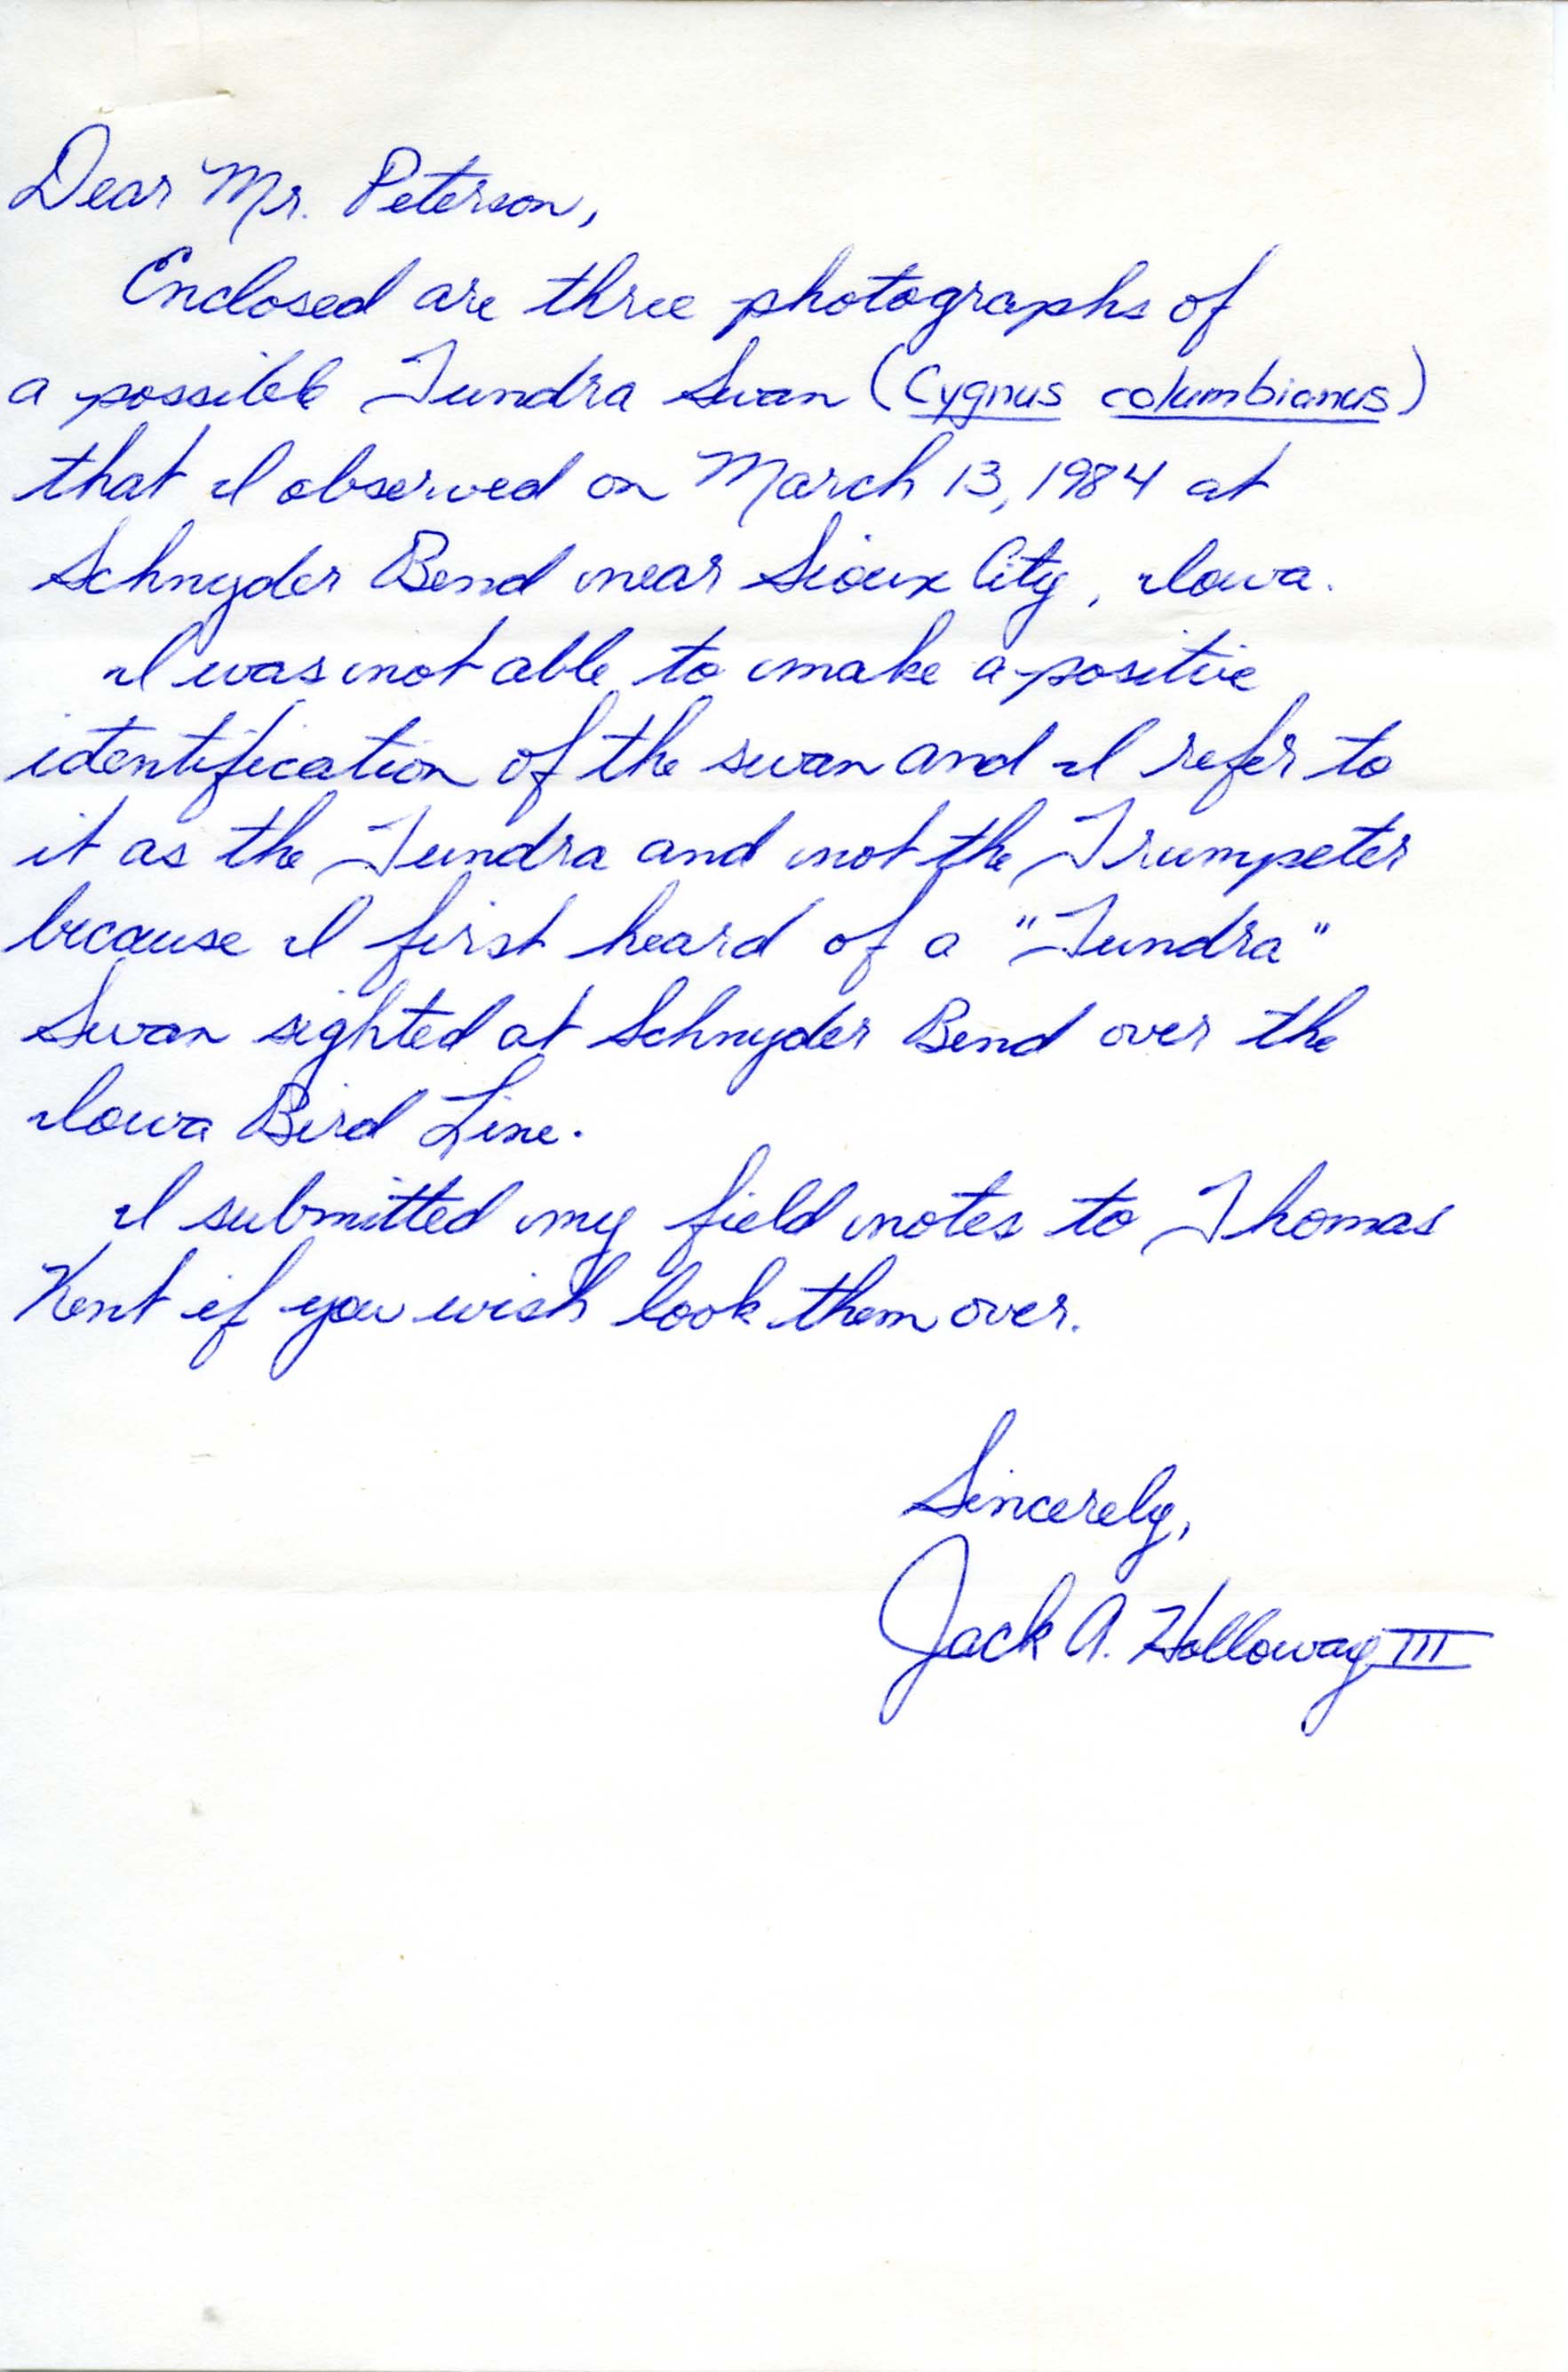 Jack A. Holloway III letter to Peter C. Petersen regarding bird sighting photographs of Tundra Swan at Snyder Bend in 1984